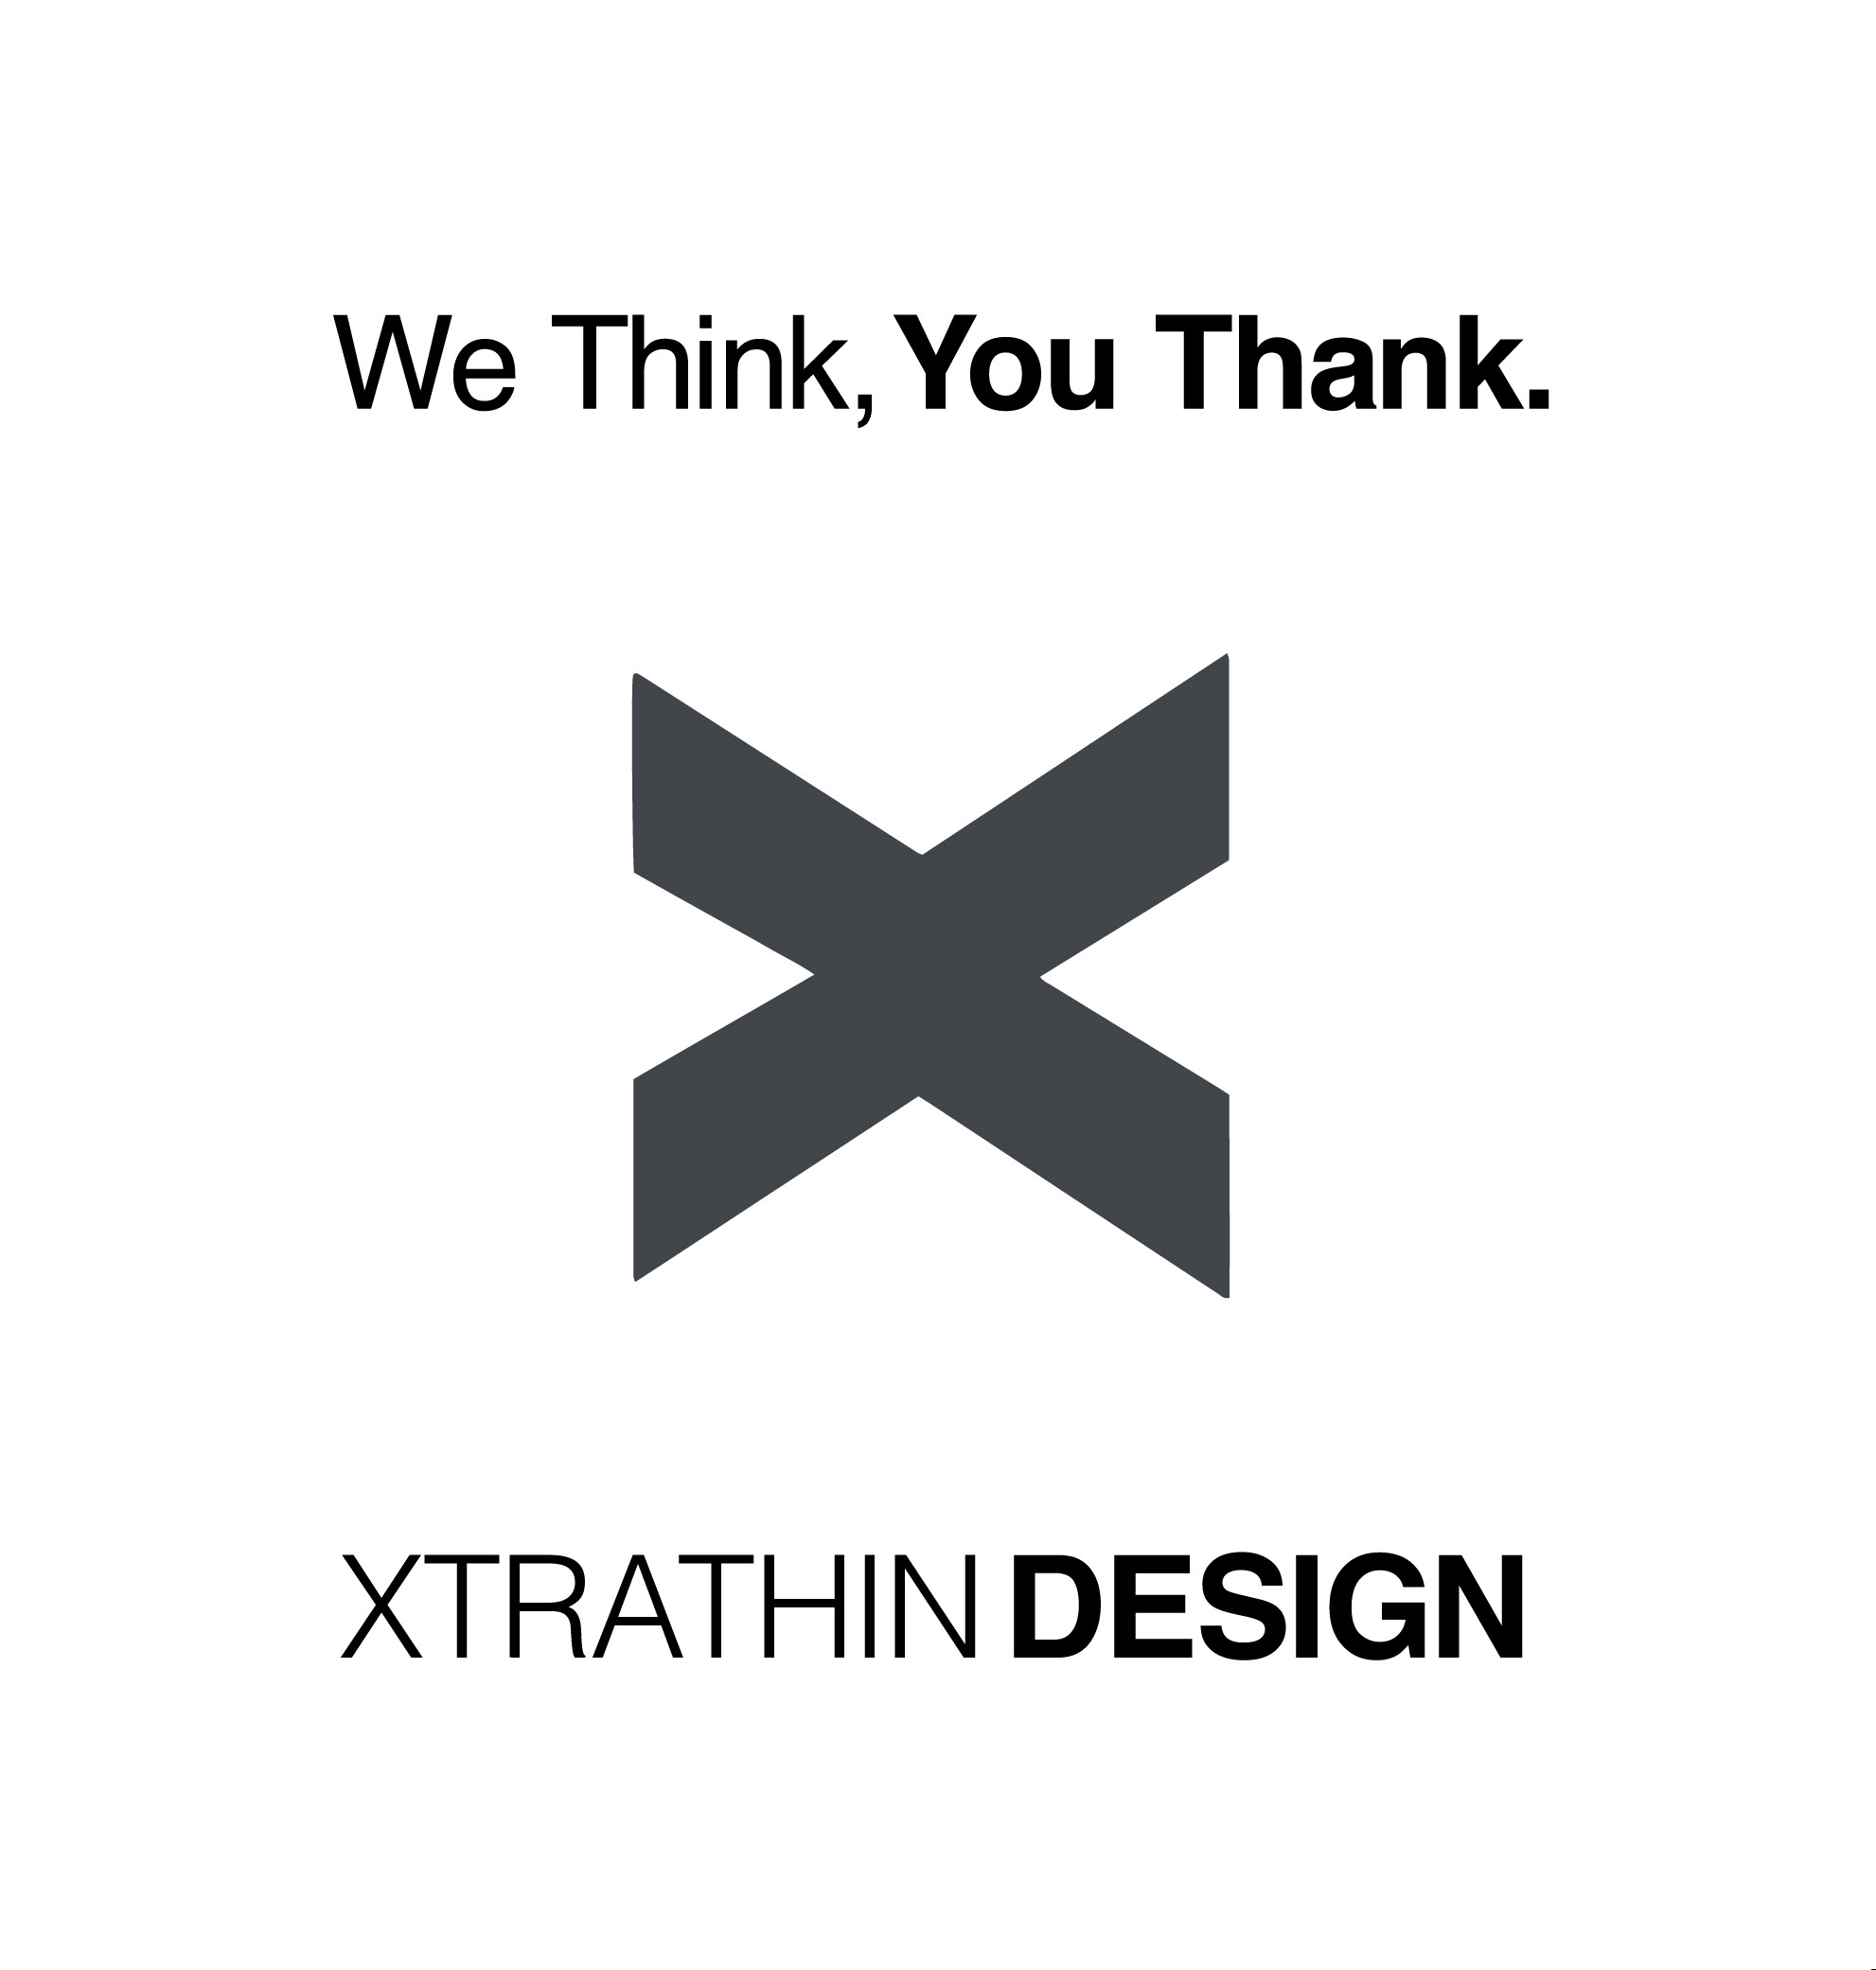 Founded in 2006, Xtrathin Design Pvt ltd is a Mumbai-based company that specialises in designing and developing creative and innovative products. Founded by Karthikeyan Ramachandran, an artist, art curator and a designer par excellence, Karthik wears many hats. Son of legendary artist Late K.N. Ramachandran, Karthik has been at the helm of some of the most known advertising campaigns in India including times of india, Incredible india, Viacom, Amazon, Goa Tourism to name a few. Karthik is also the founder of the art gallery ‘False Ceiling’ and the art festival ‘Appa Art Fest’. His paintings blend the future with the past, culture with context and real with the imaginary. Xtrathin, has been part of some iconic campaigns for brands which include Animation, Graphics and shoot based work. Brands like UTV, Mtv and Miko were among a few retainer clients. Xtrathin designed the identity for Cinemas of India, Film Bazaar and India Pavillion at Cannes film festival 3 years in a row. We have also done publicity creatives for over 40 feature films. In terms of Image Identity, we were the design house which created the identity for Vh1 India in their launch year. We also have an animation team & we have produced over 30 animated ad films & title sequences for movies in various cutting edge styles The last 2 projects done for Goa & Gujarat tourism were both inaugurated by PM Narendra Modi.